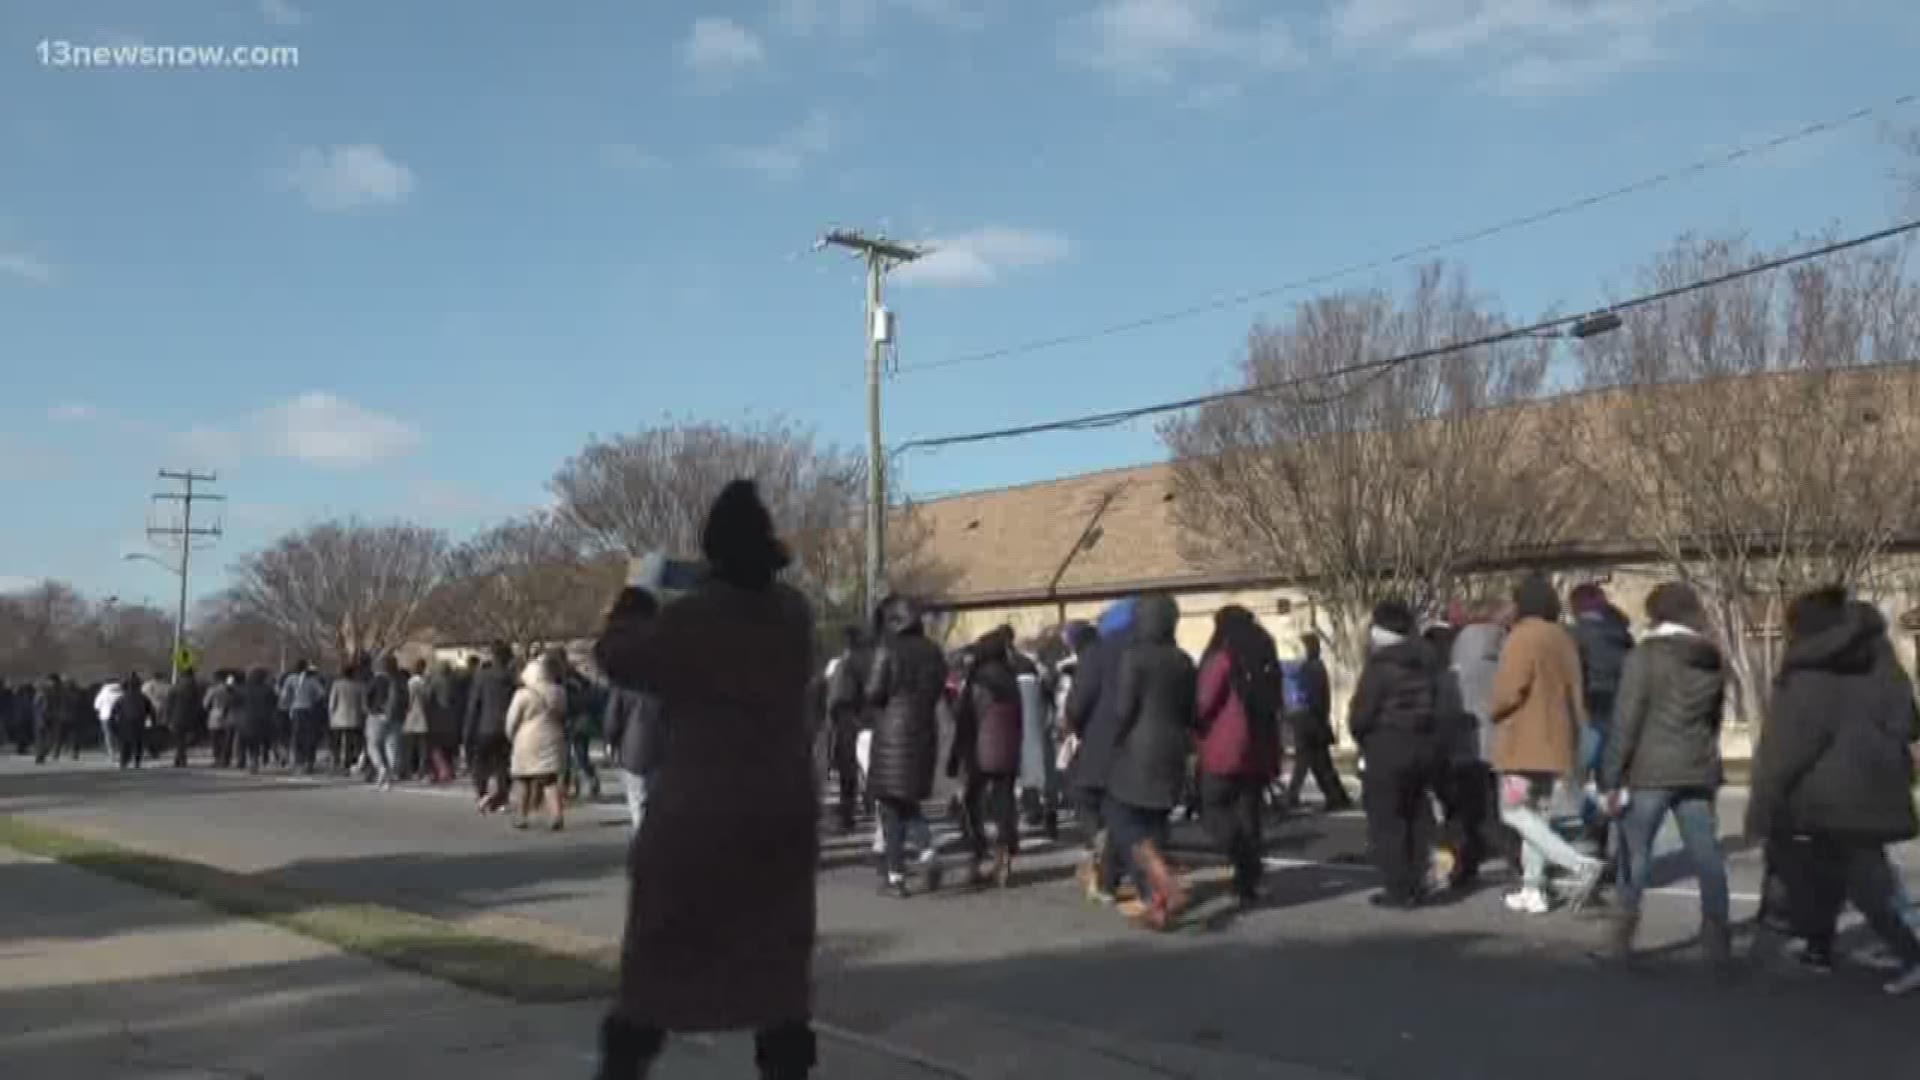 Students from Hampton University braved the cold to march as an observance for Reverend Dr. Martin Luther King, Jr.